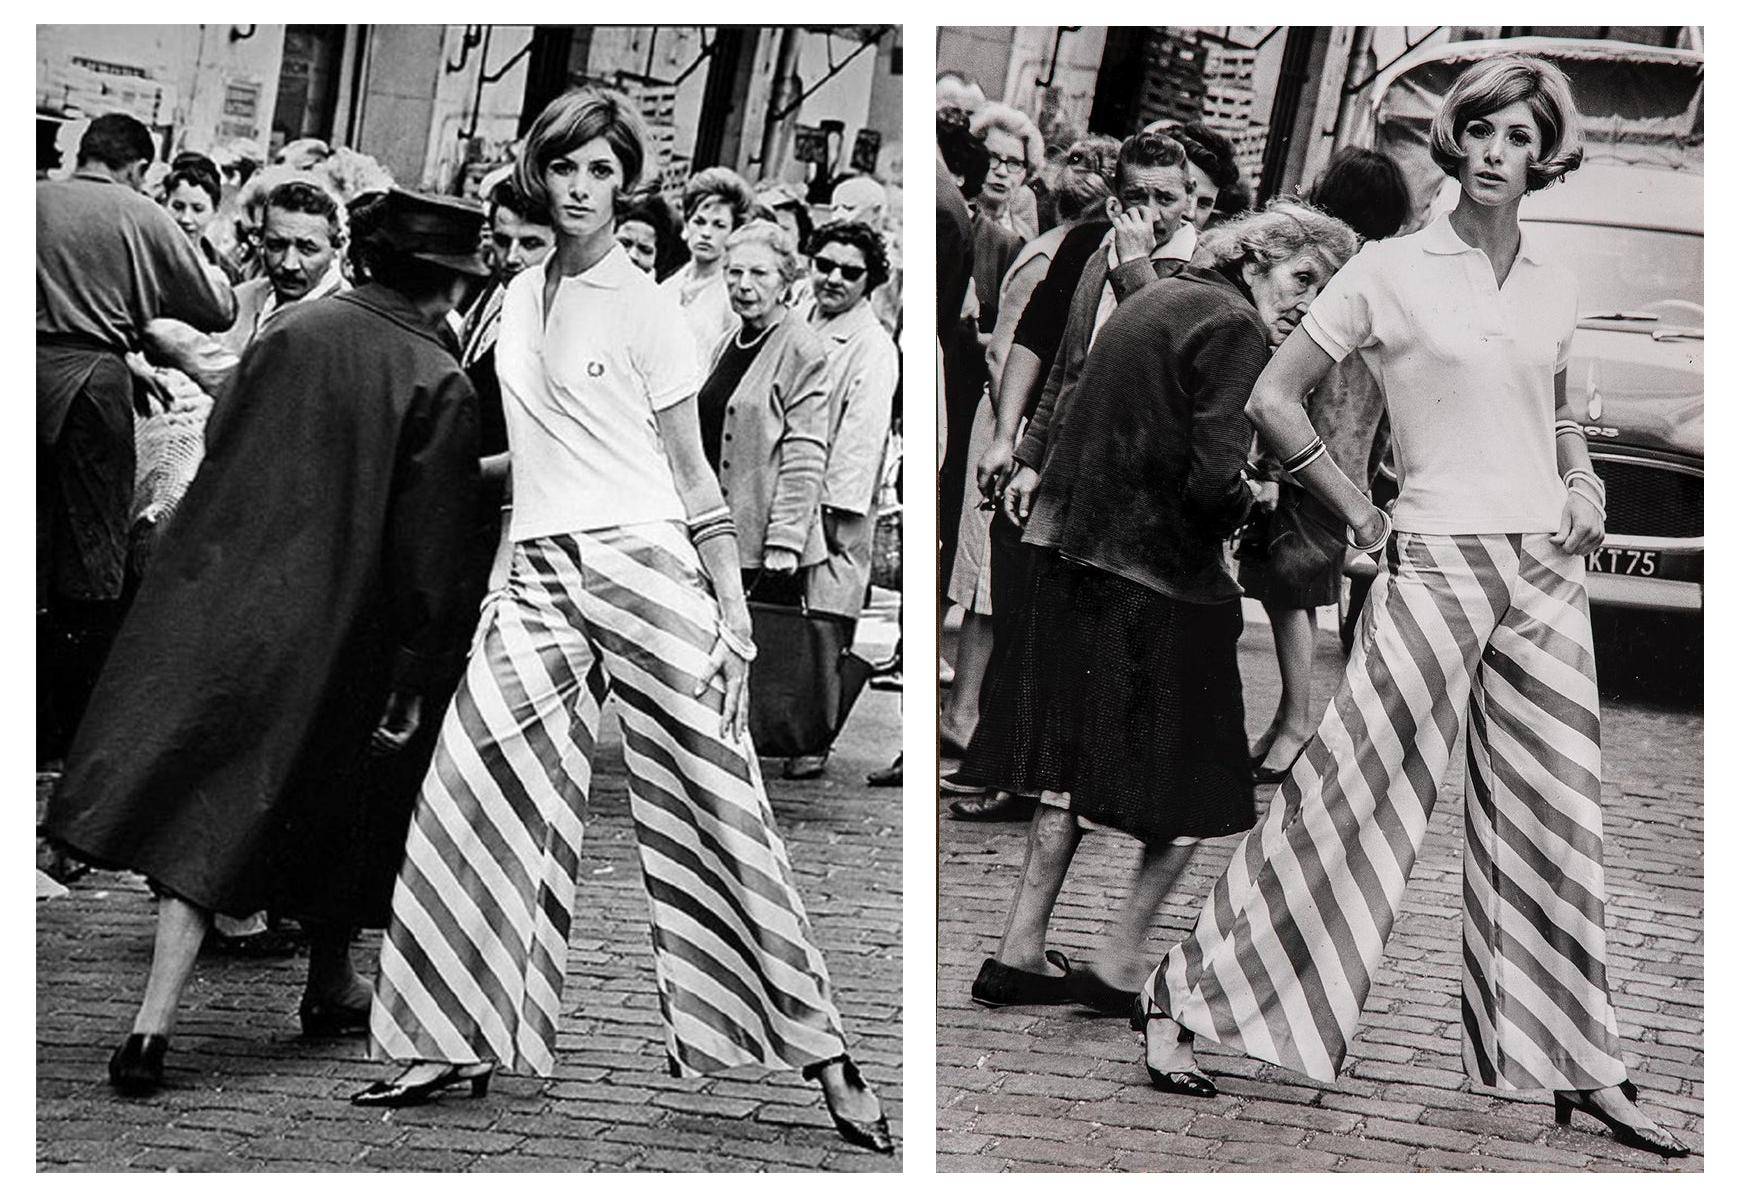 Uwe Ommer Figurative Photograph - Rue Mouffetard - Diptych. Black and White Photographs. Fashion. Paris